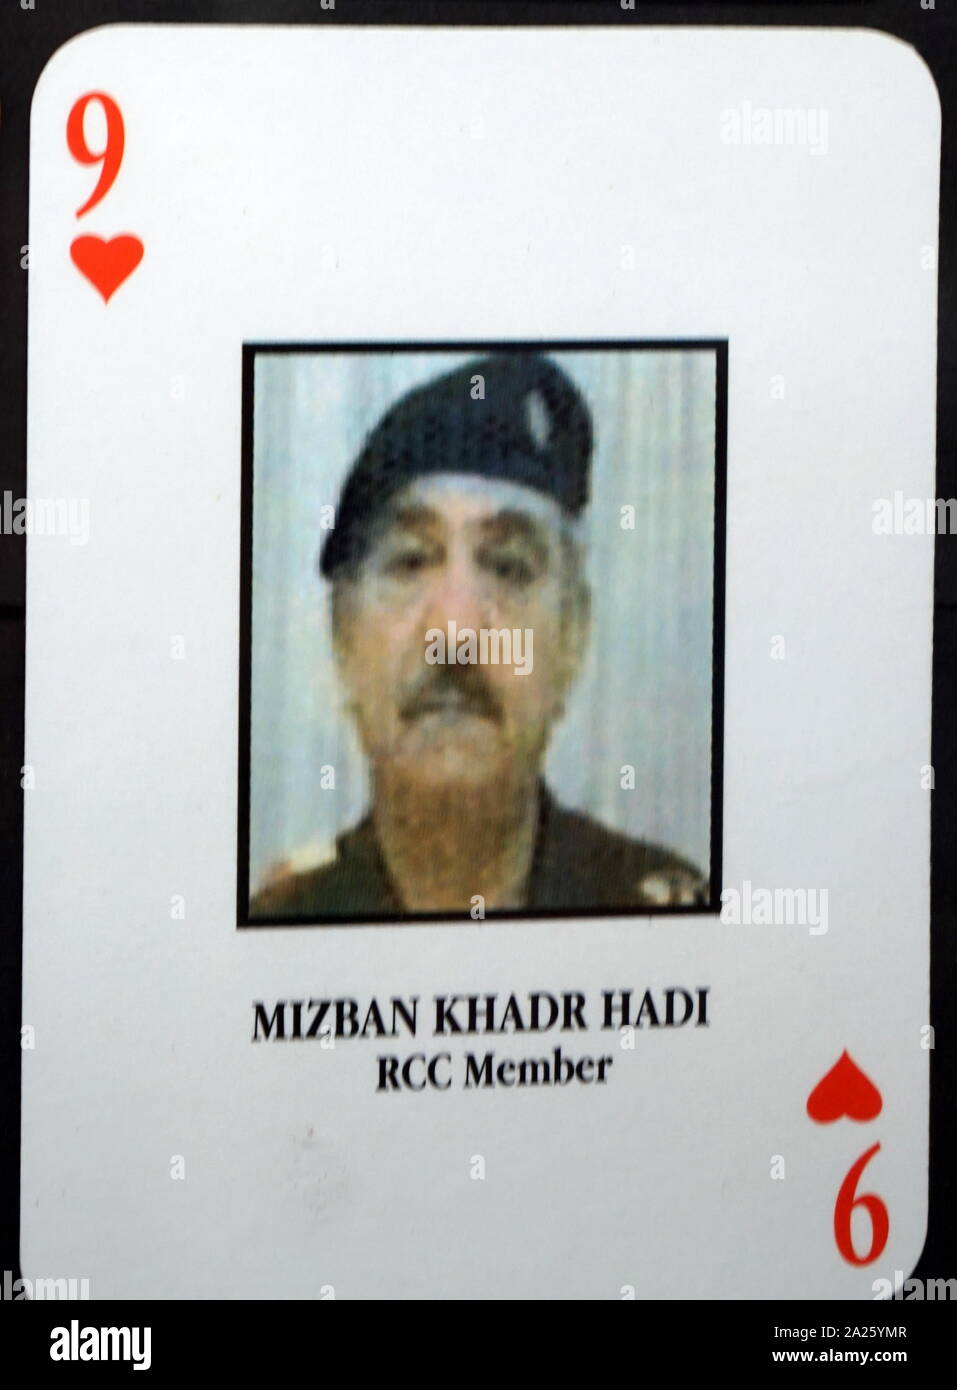 Most-wanted Iraqi playing cards - Mizban Khadr Hadi (RCC Member). The U.S. military developed a set of playing cards to help troop identify the most-wanted members of President Saddam Hussein's government during the 2003 invasion of Iraq. Stock Photo